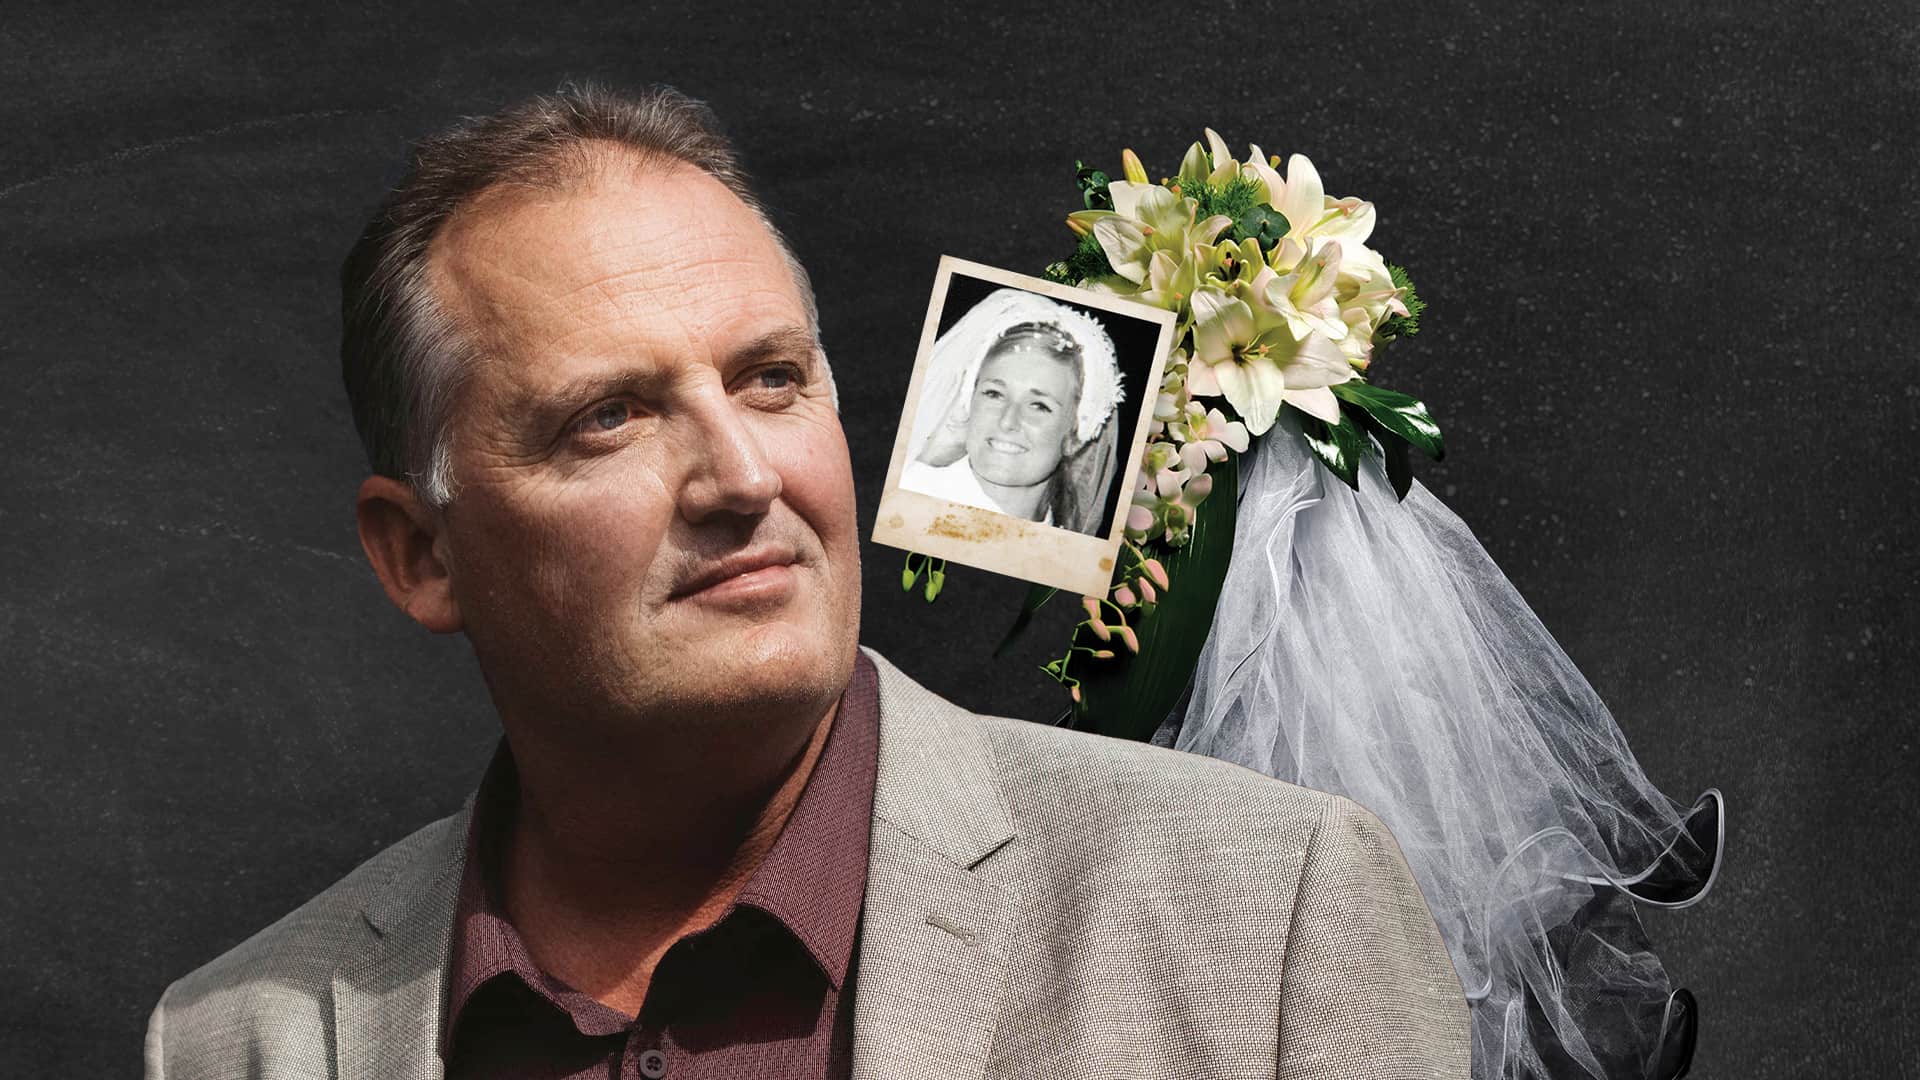 Portrait of man with photograph of bride, bouquet and veil in background